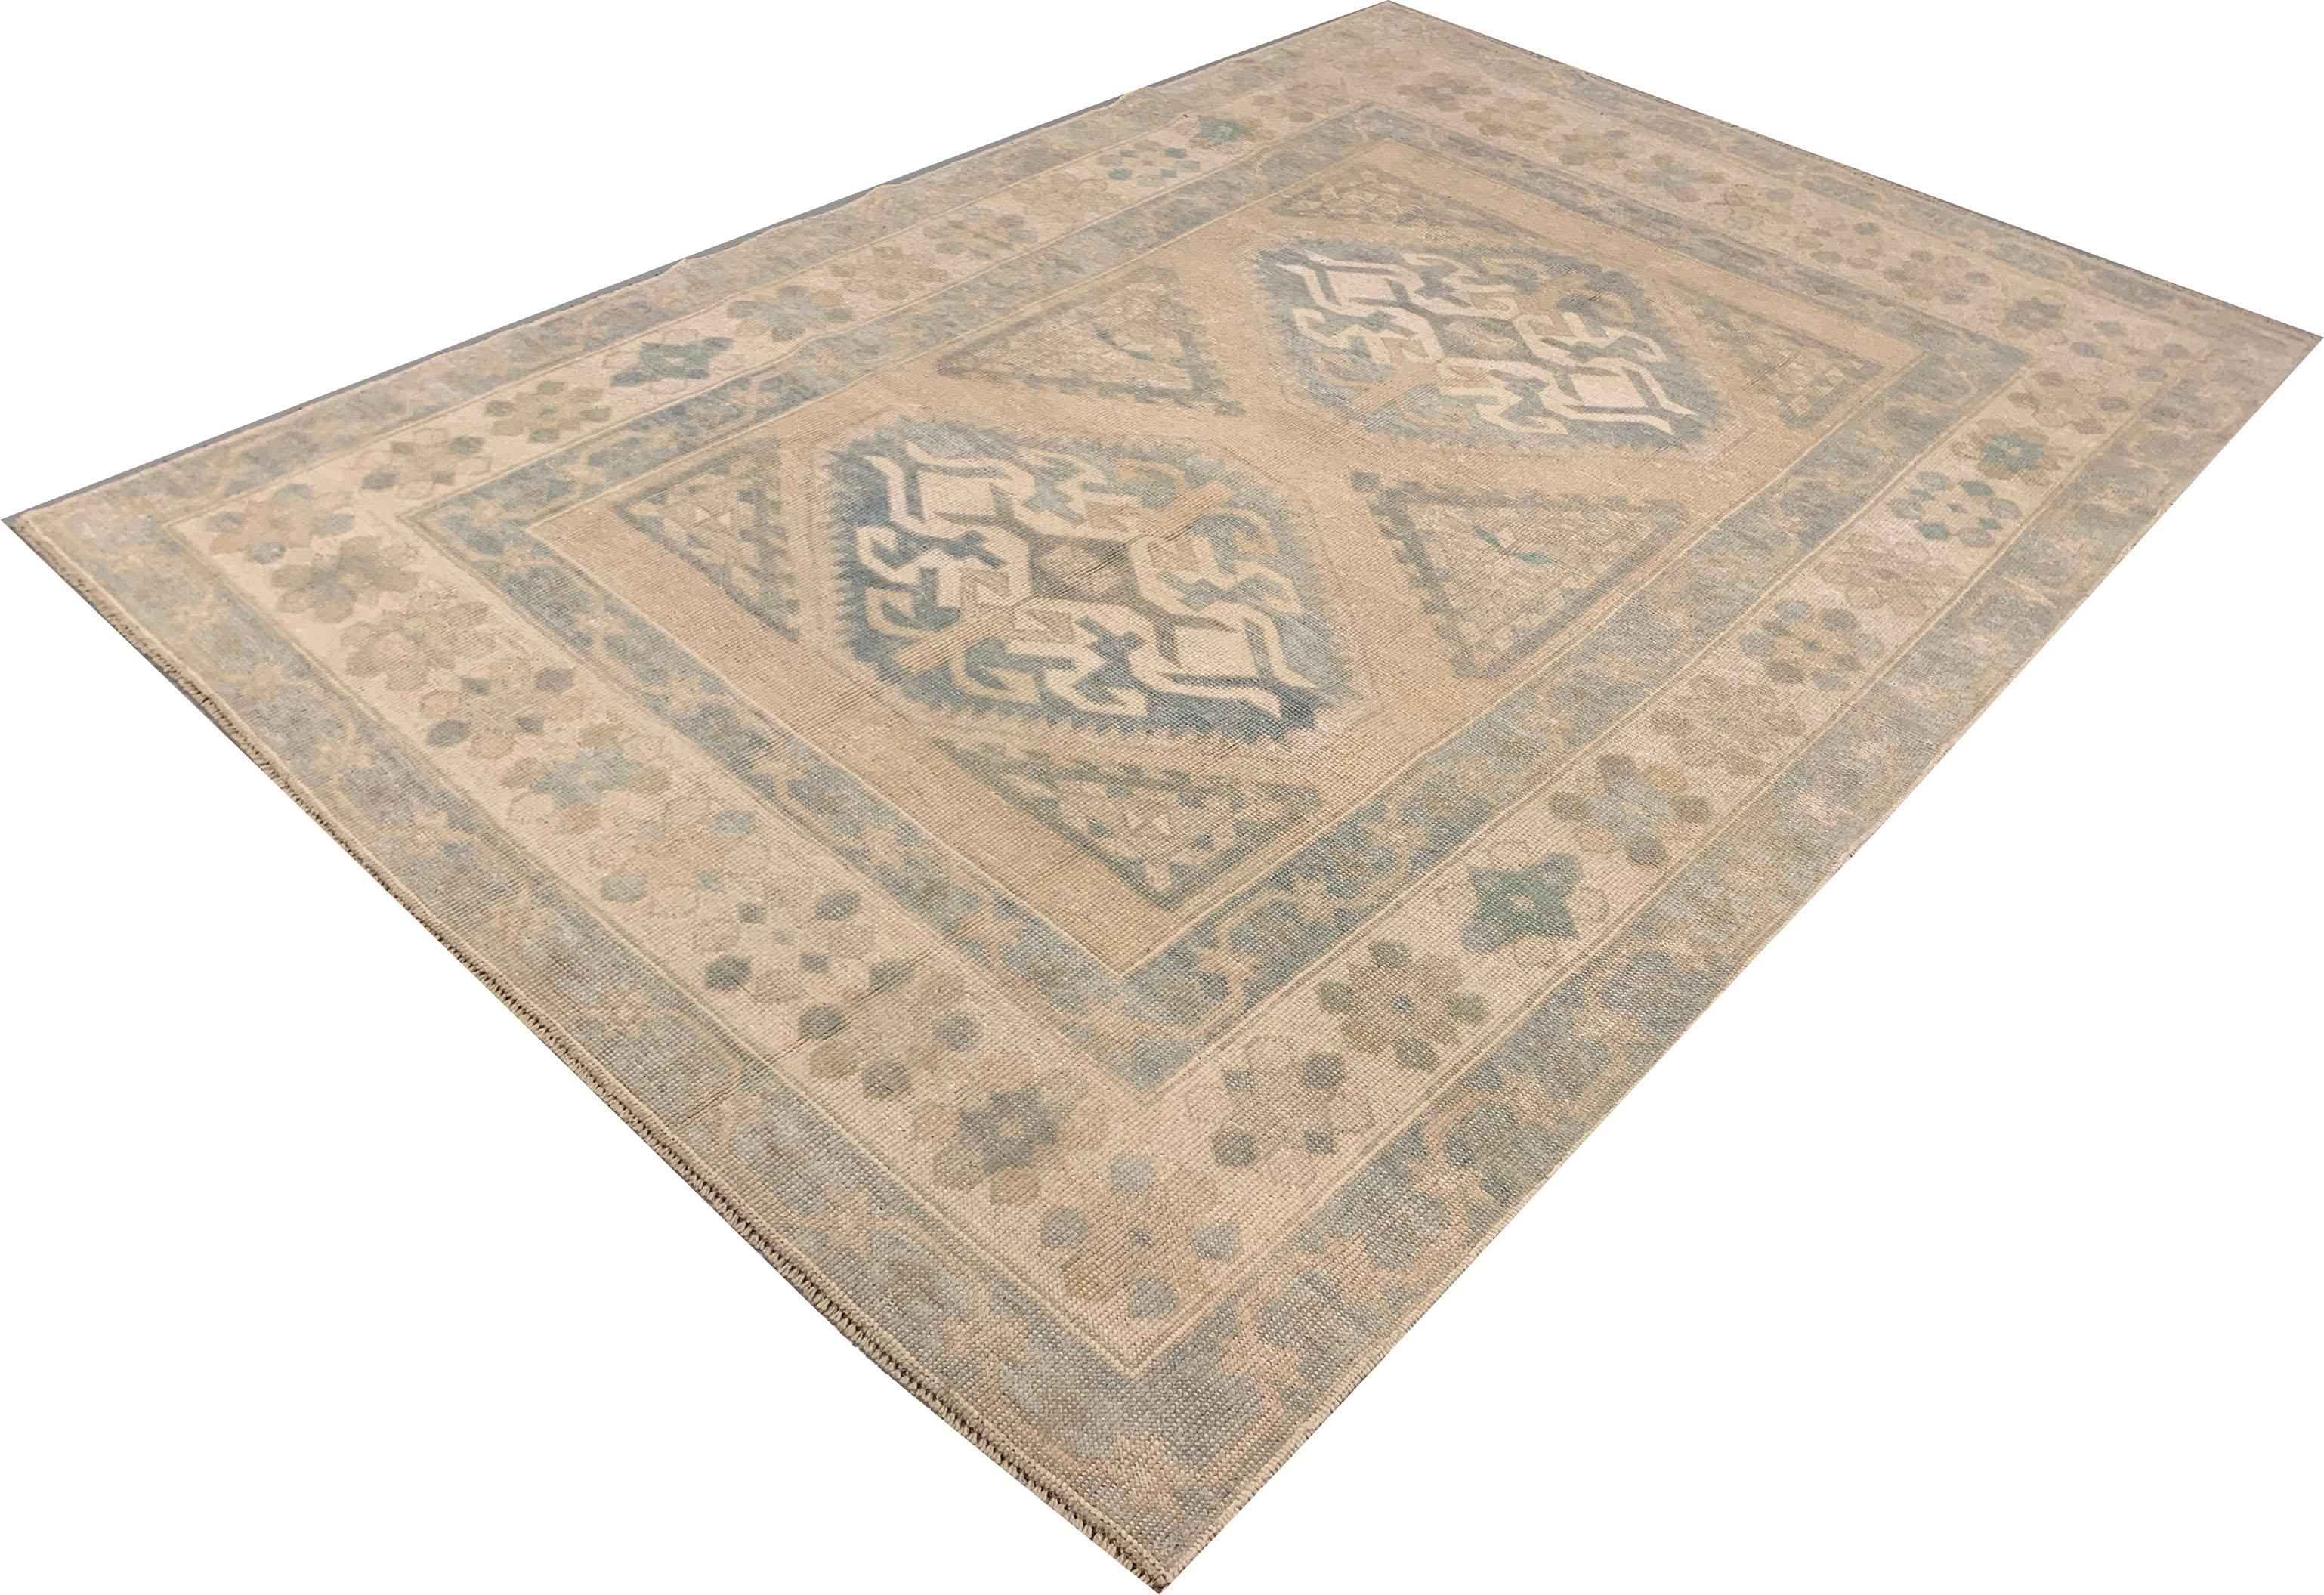 Vintage Turkish Oushak area rug, 4'6 x 6'5. Oushak's are known for their soft palettes combined with eccentric drawing. Oushak in western Turkey has the longest continuous rug weaving history, stretching back at least to the mid-fifteenth century.